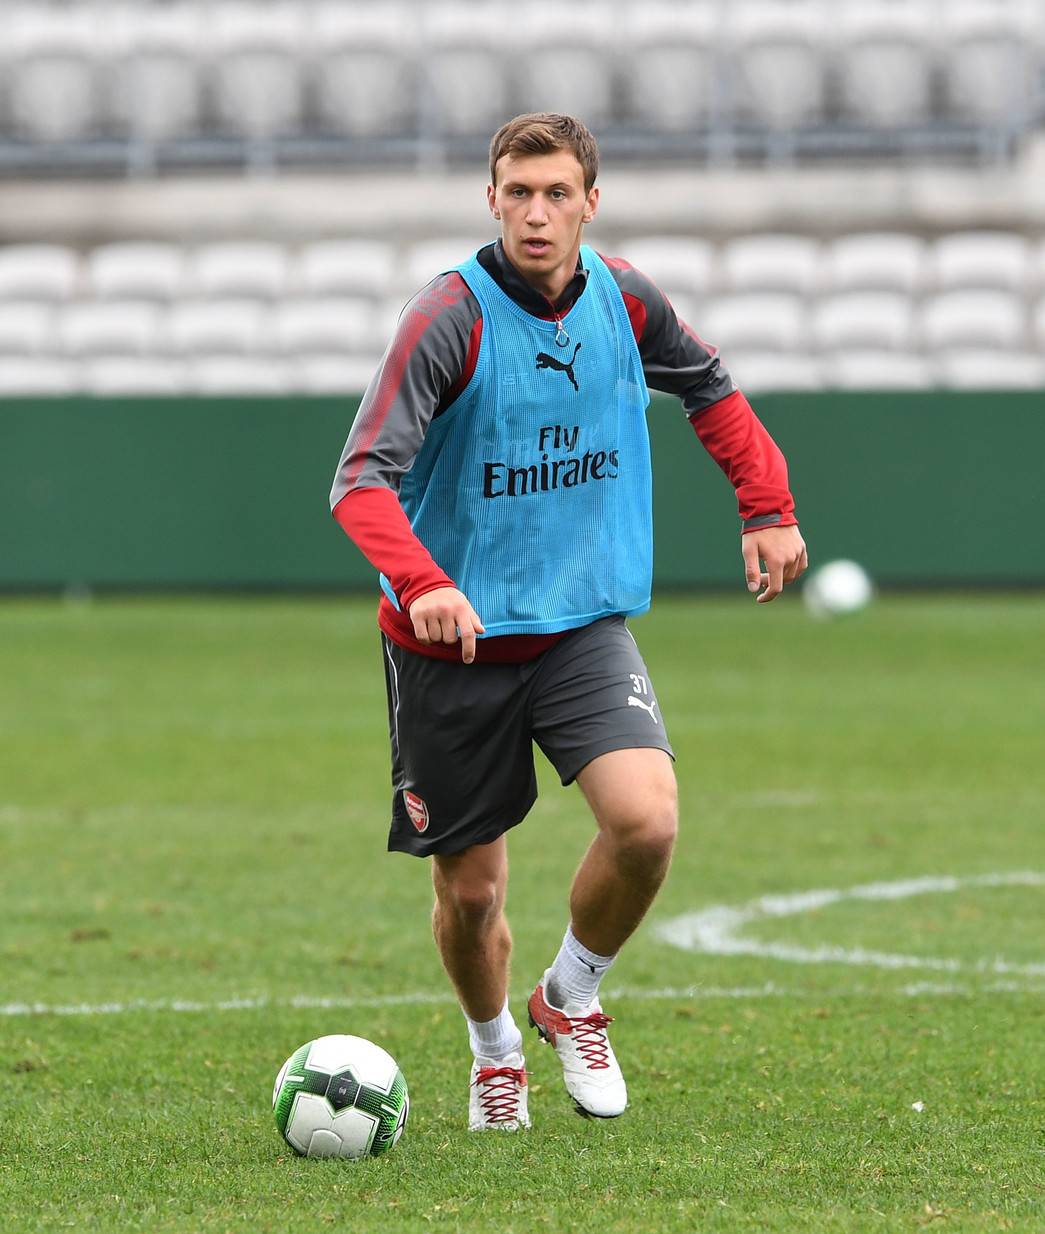 SYDNEY, AUSTRALIA - JULY 12: Krystain Bielik during the Arsenal Training Session at at Koragah Oval on July 12, 2017 in Sydney, Australia. (Photo by David Price/Arsenal FC via Getty Images)